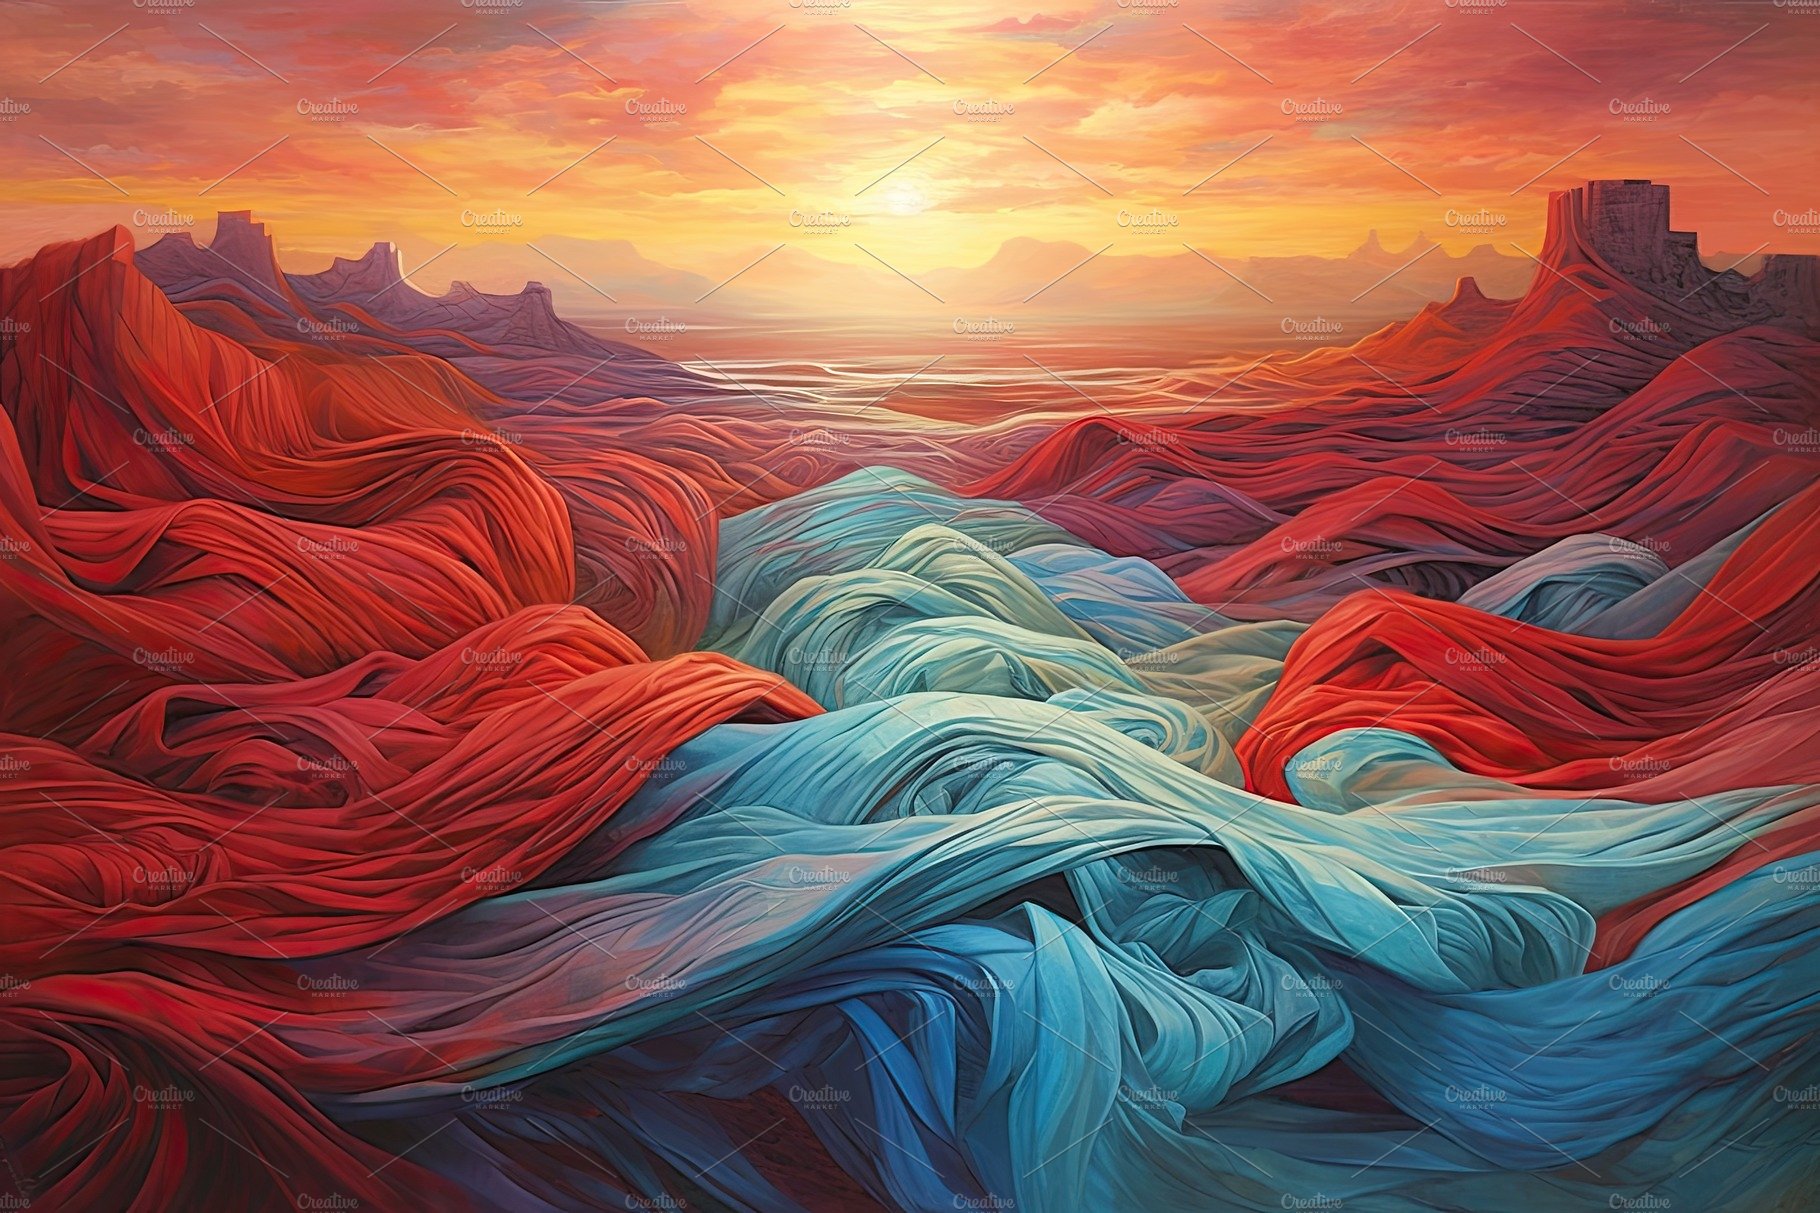 Colorful cloth weaved abstract painting over a sunset background cover image.